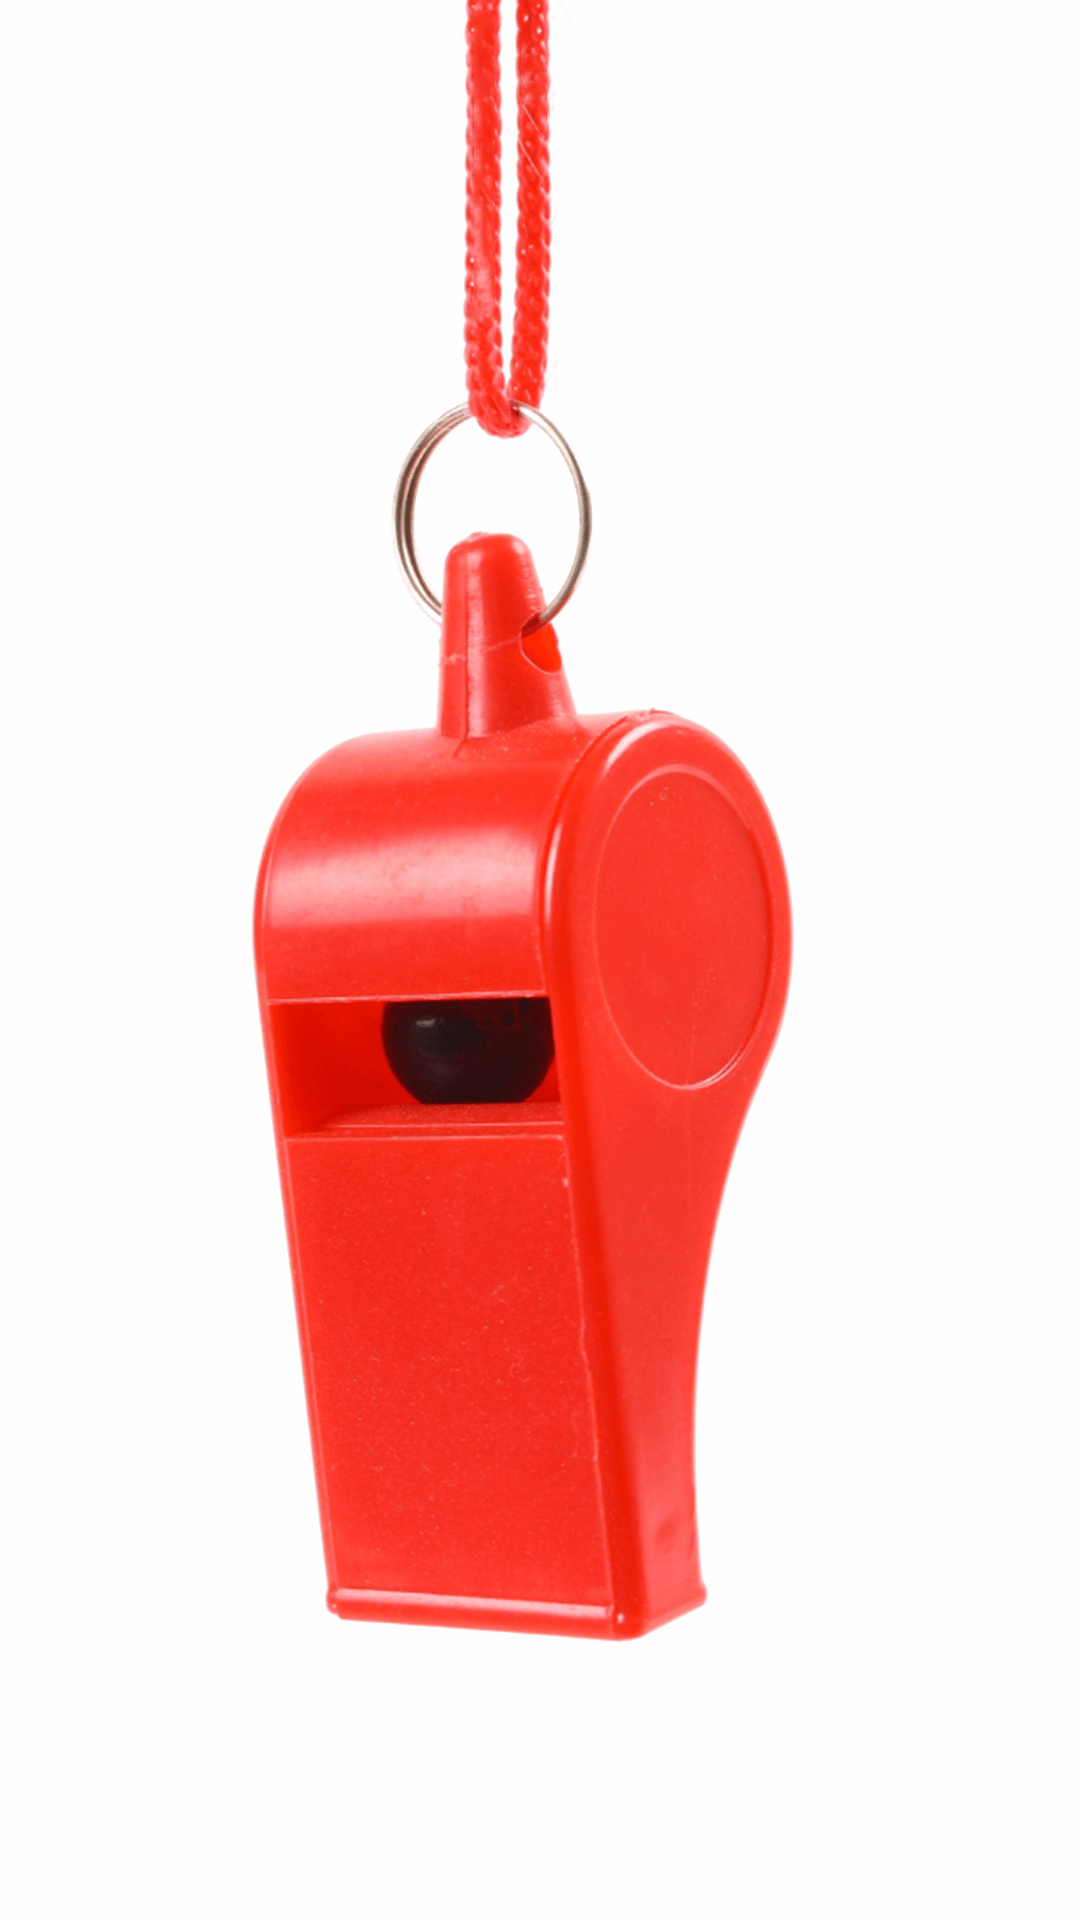 A red whistle